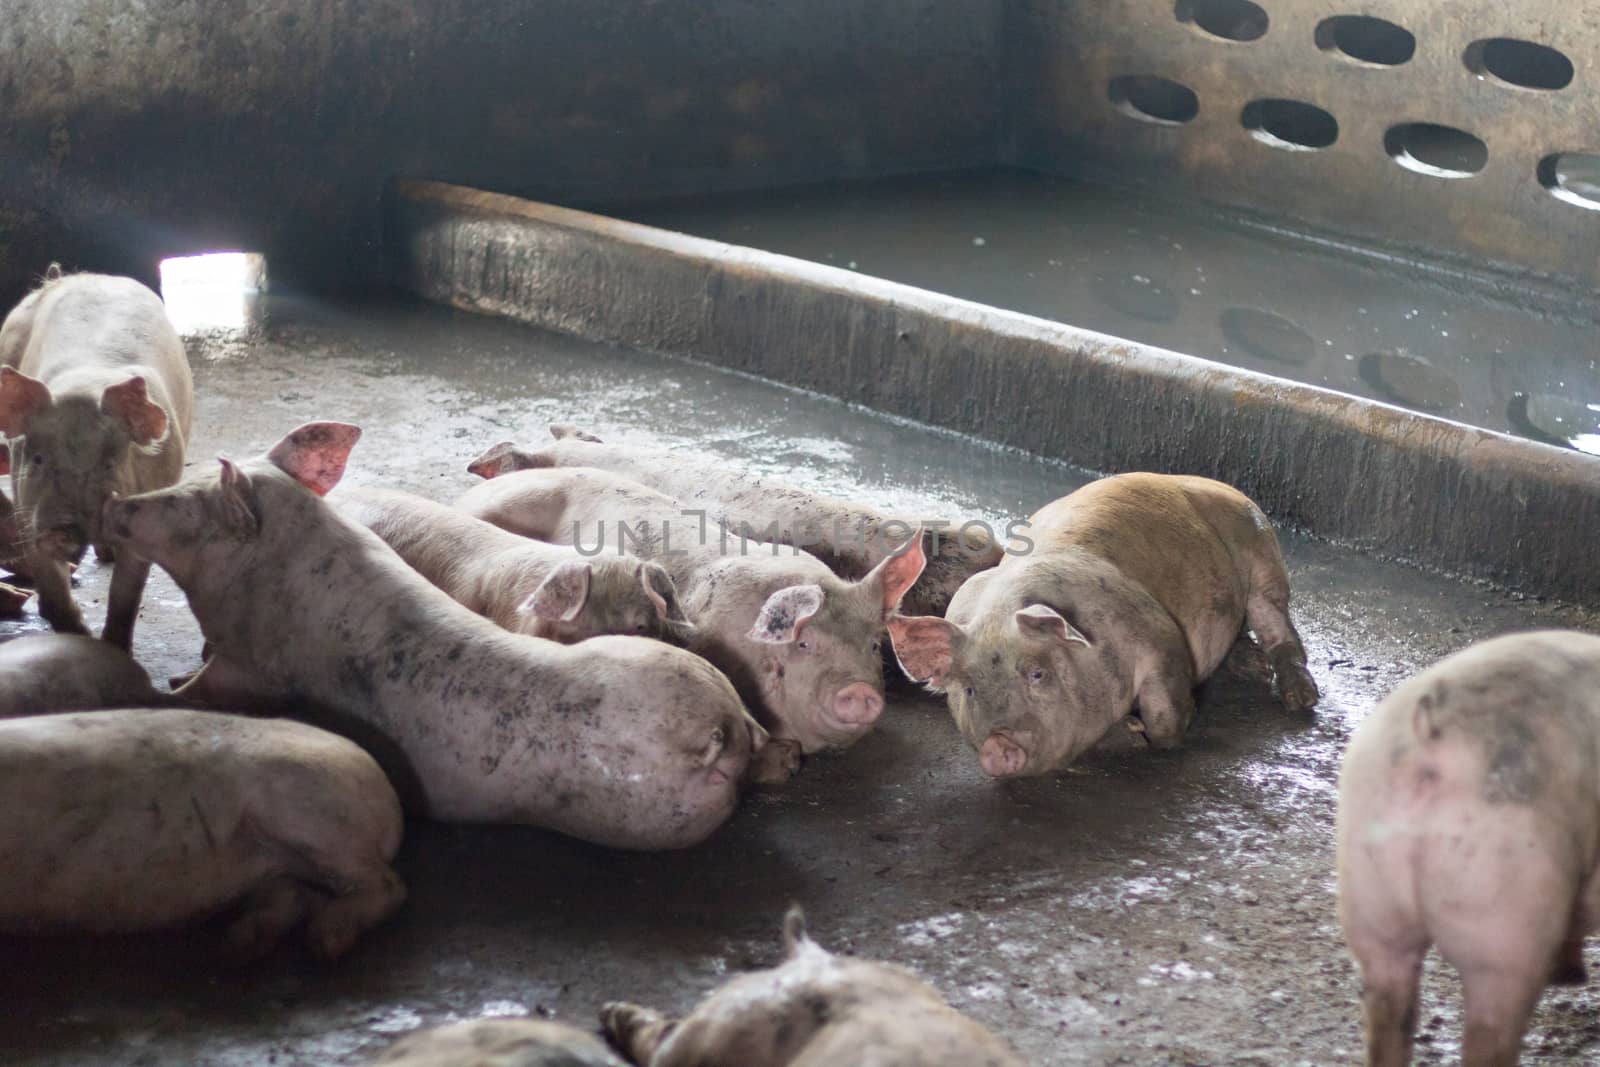 Pigs are sleeping after eating. They are fat. Pig in a pig farm by minamija